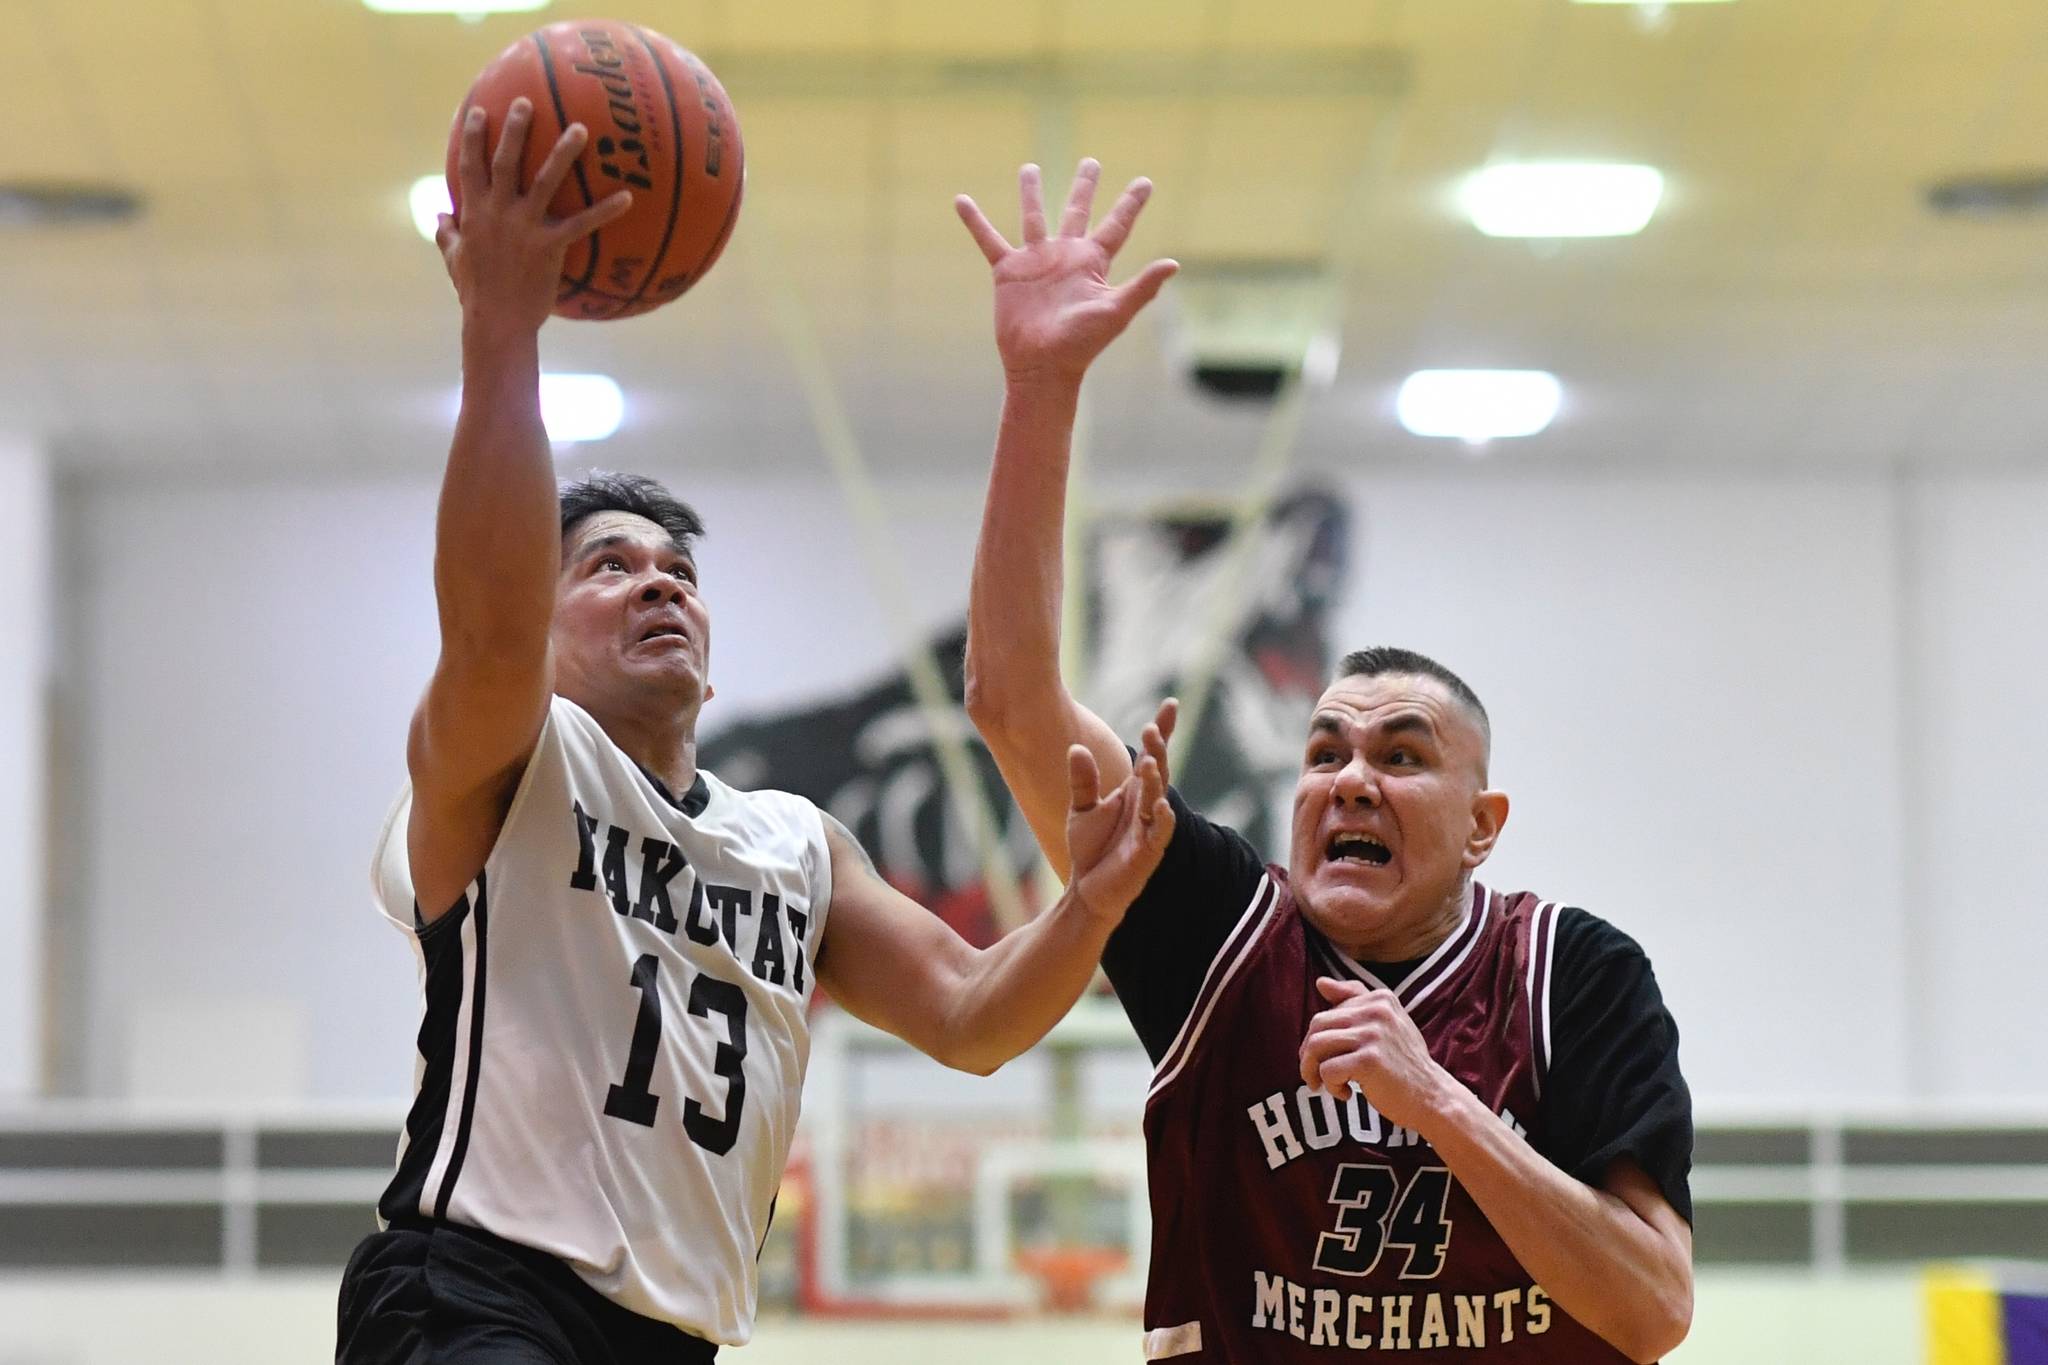 Yakutat’s Jerry Riddlington, left, lays the ball up against Hoonah’s James Mercer in the Masters bracket game at the Gold Medal Basketball Tournament on Thursday, March 21, 2019. (Michael Penn | Juneau Empire)